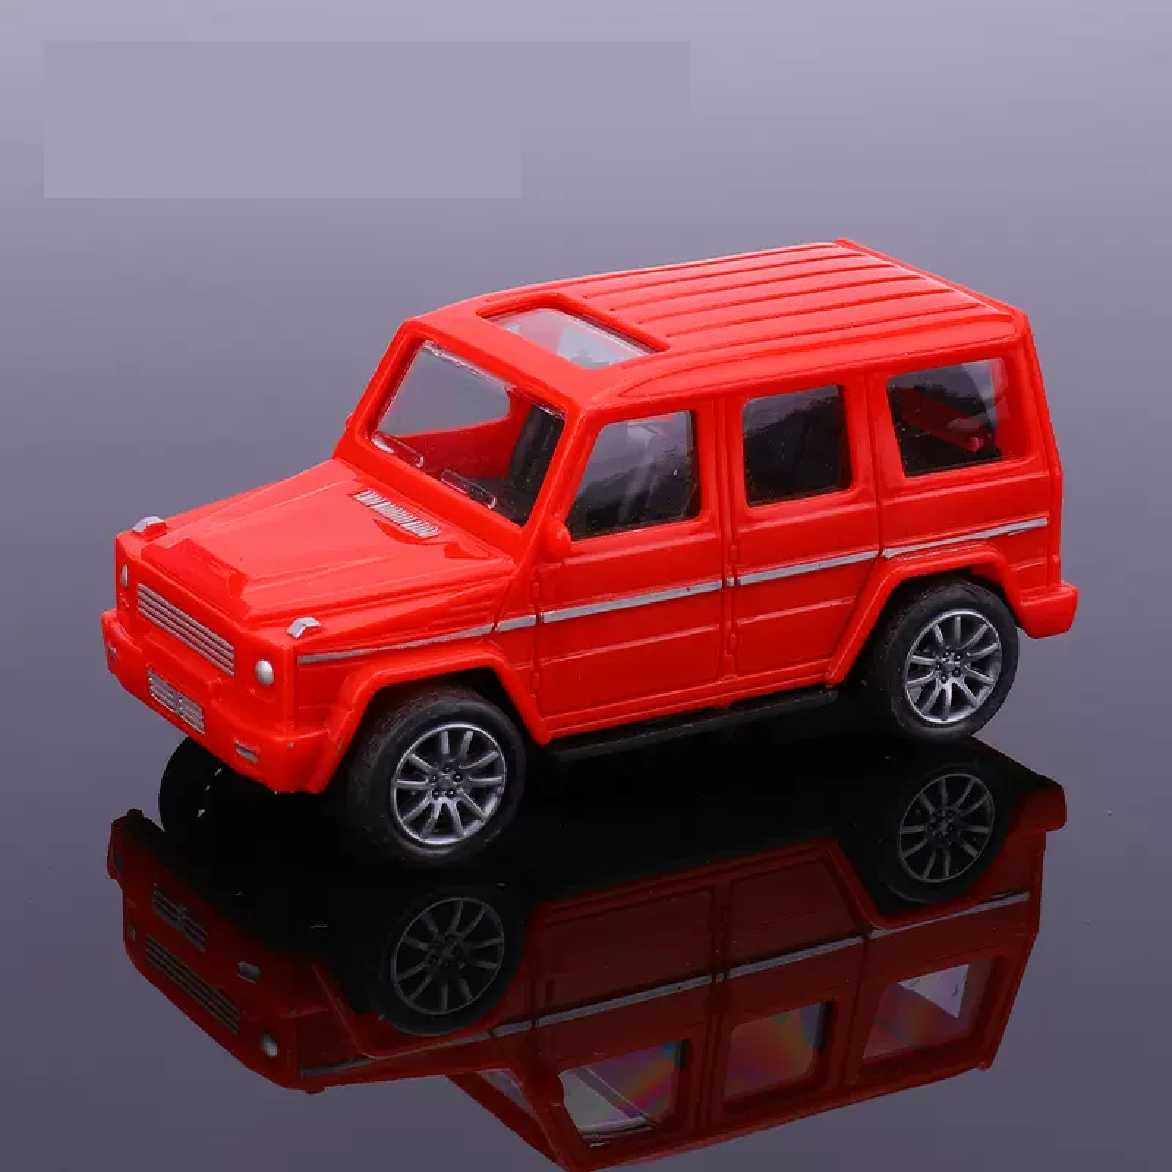 Cake Topper, Cake Decorations-  '4 x 4' off road vehicle - red - Rampant Coffee Company